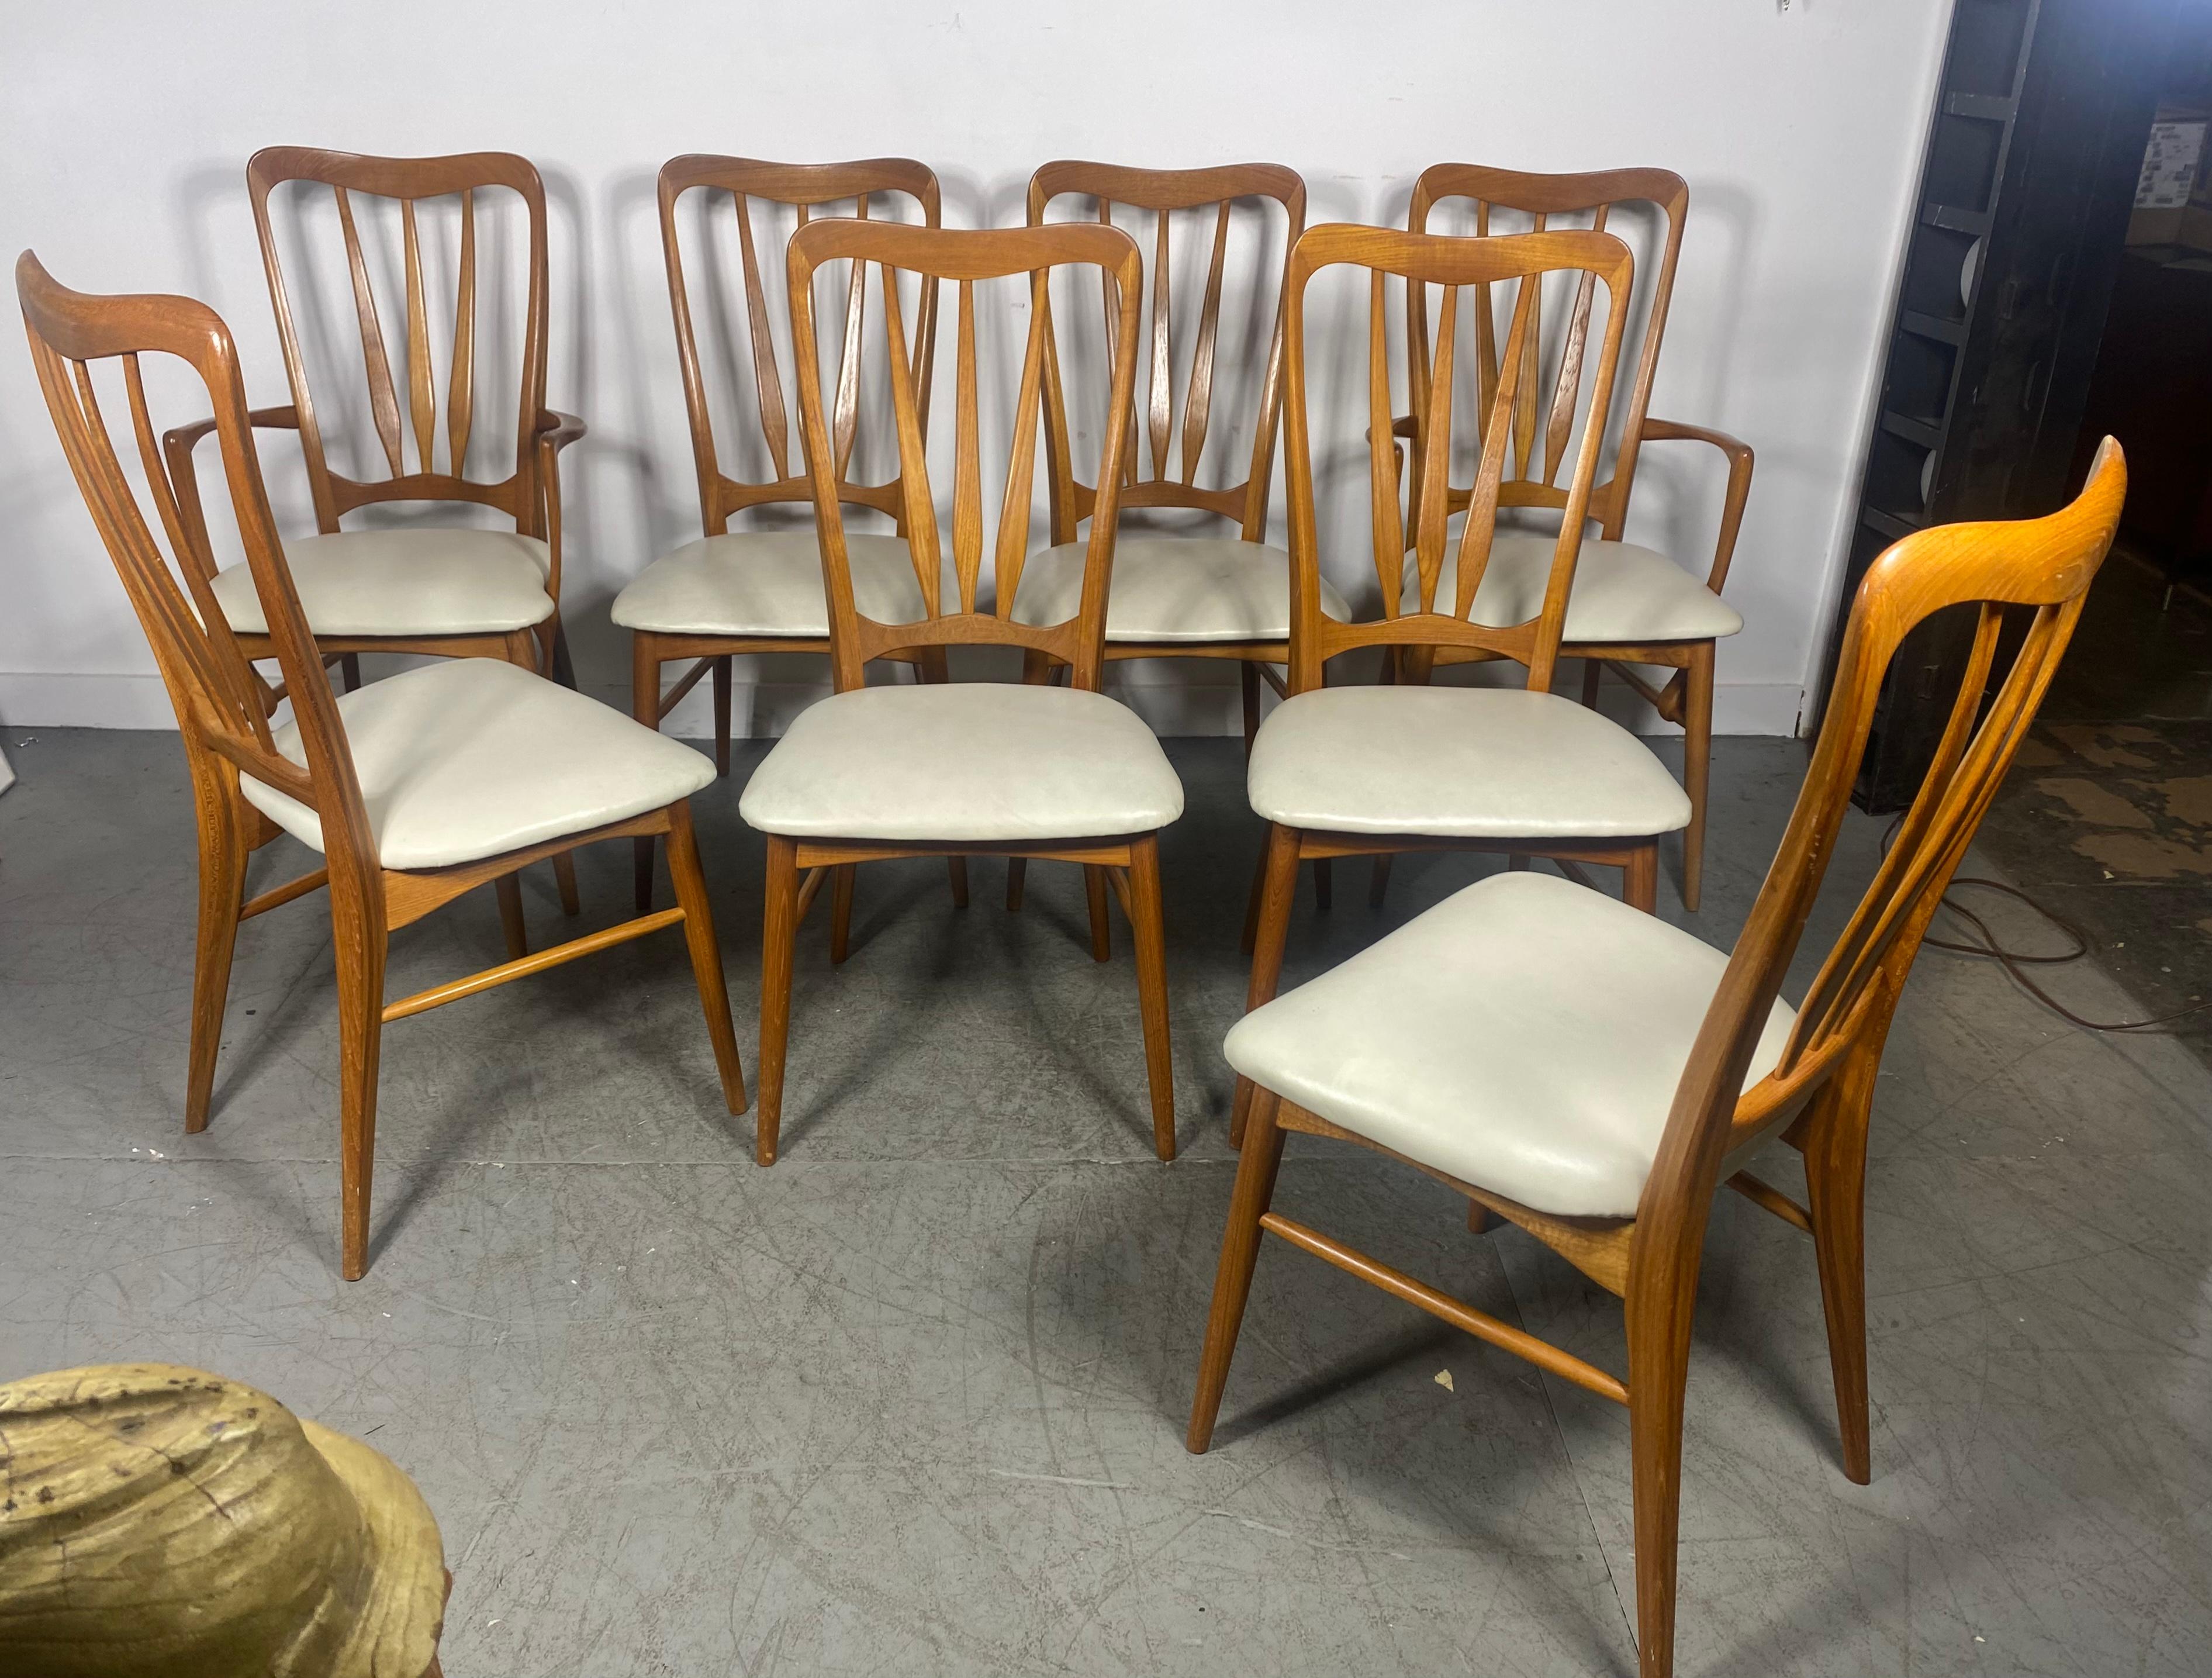 Set of eight Niels Koefoed “Ingrid” dining chairs in teak, c.1960s, Denmark for Koefoeds Hornslet. The set consists of six side chairs and two armchairs. All chairs feature sculpted frames with white Naugahyde on the seats. The armchairs have a